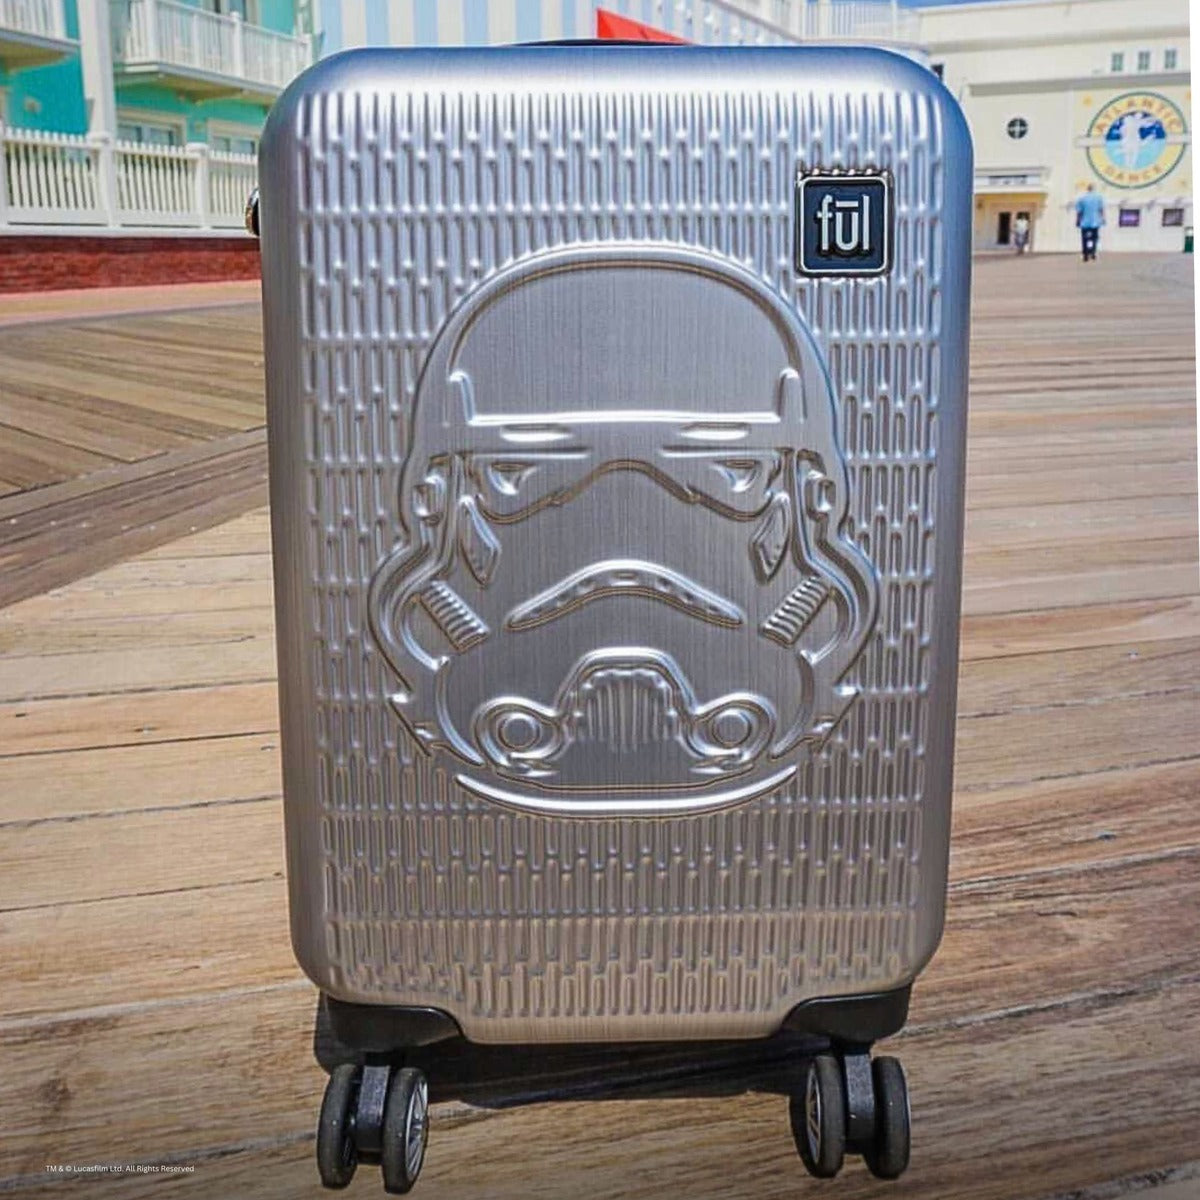 Ful Disney Star Wars Darth Vader carry-on spinner suitcase affordable luggage silver